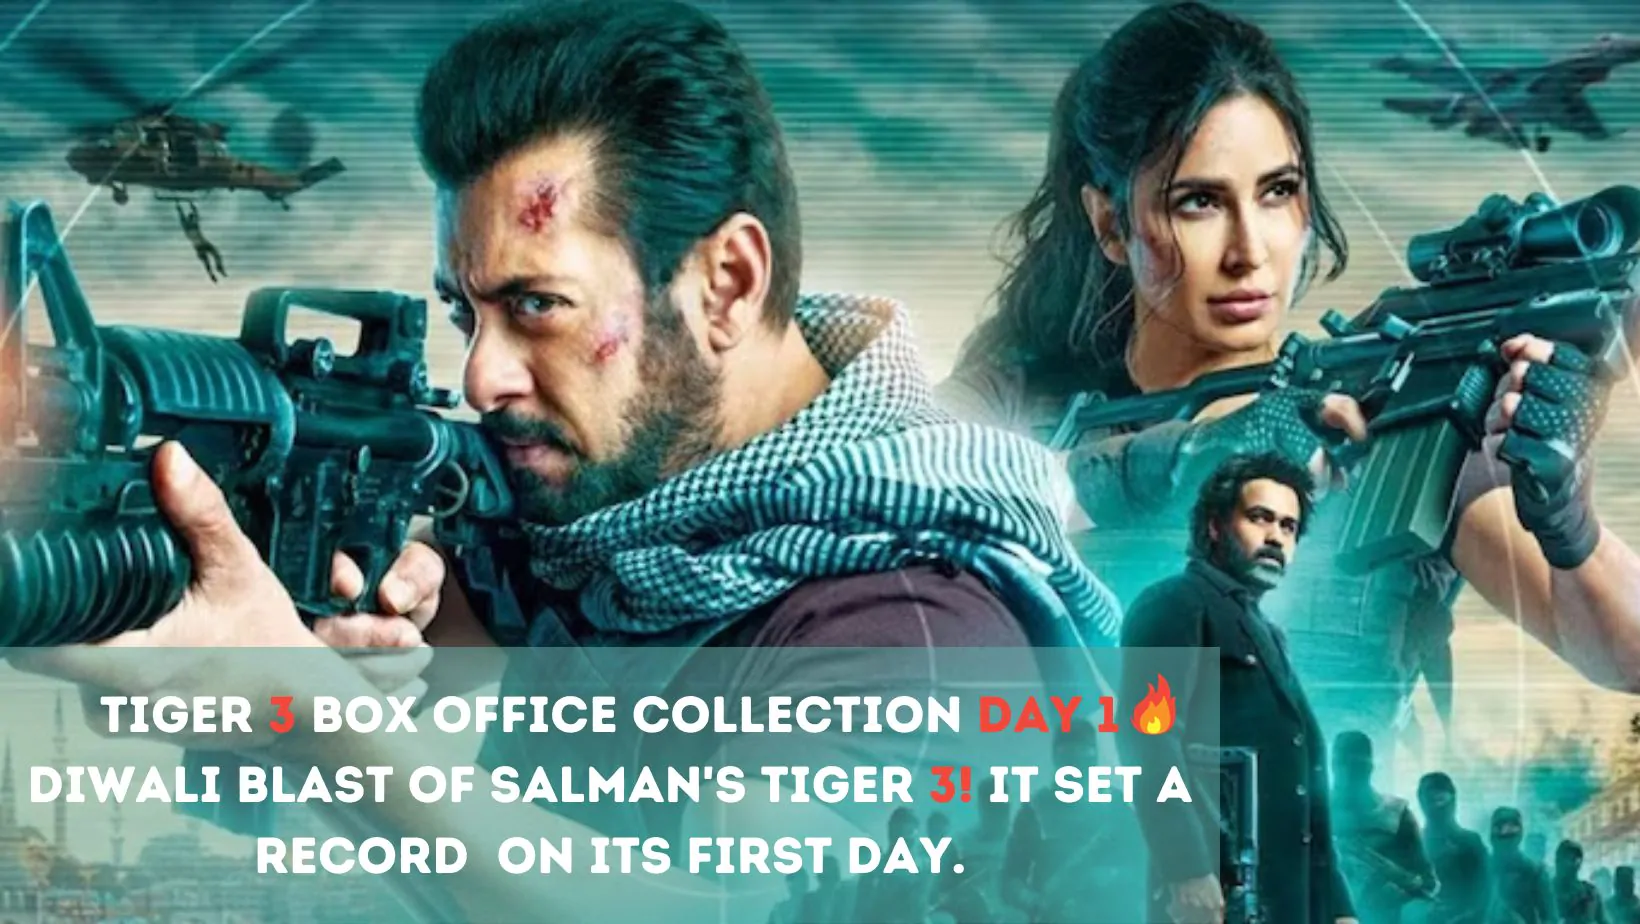 Tiger 3 Box Office Collection day 1